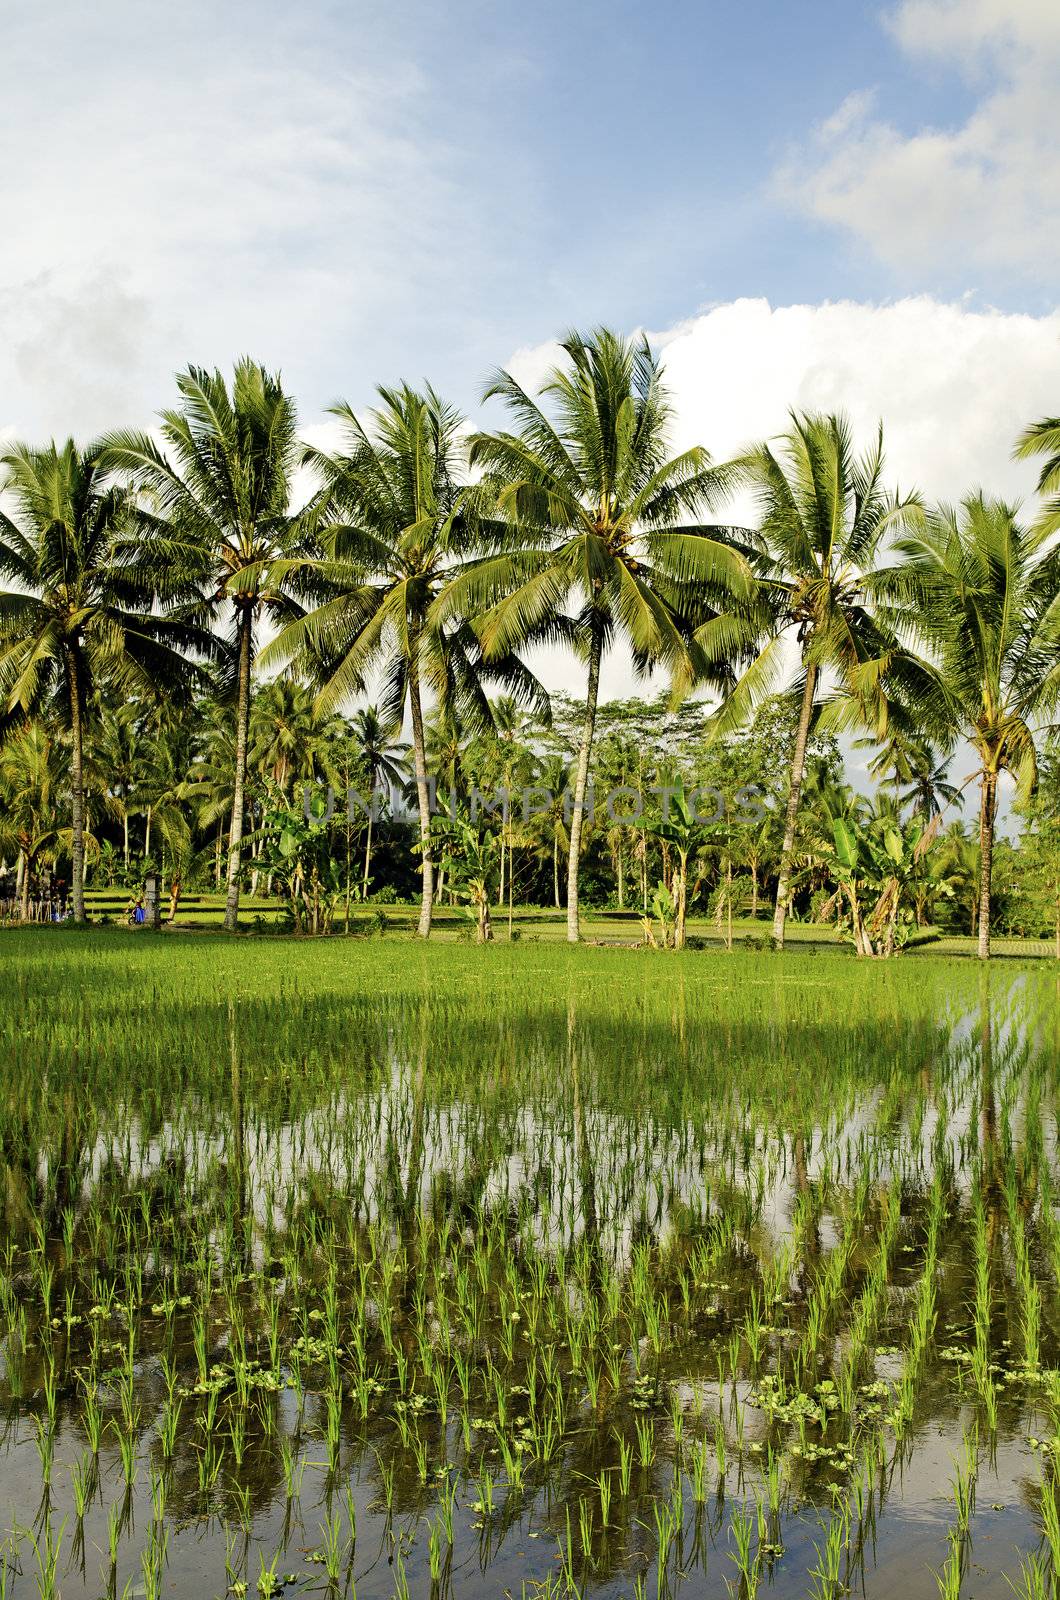 rice fieldand palm trees in bali indonesia